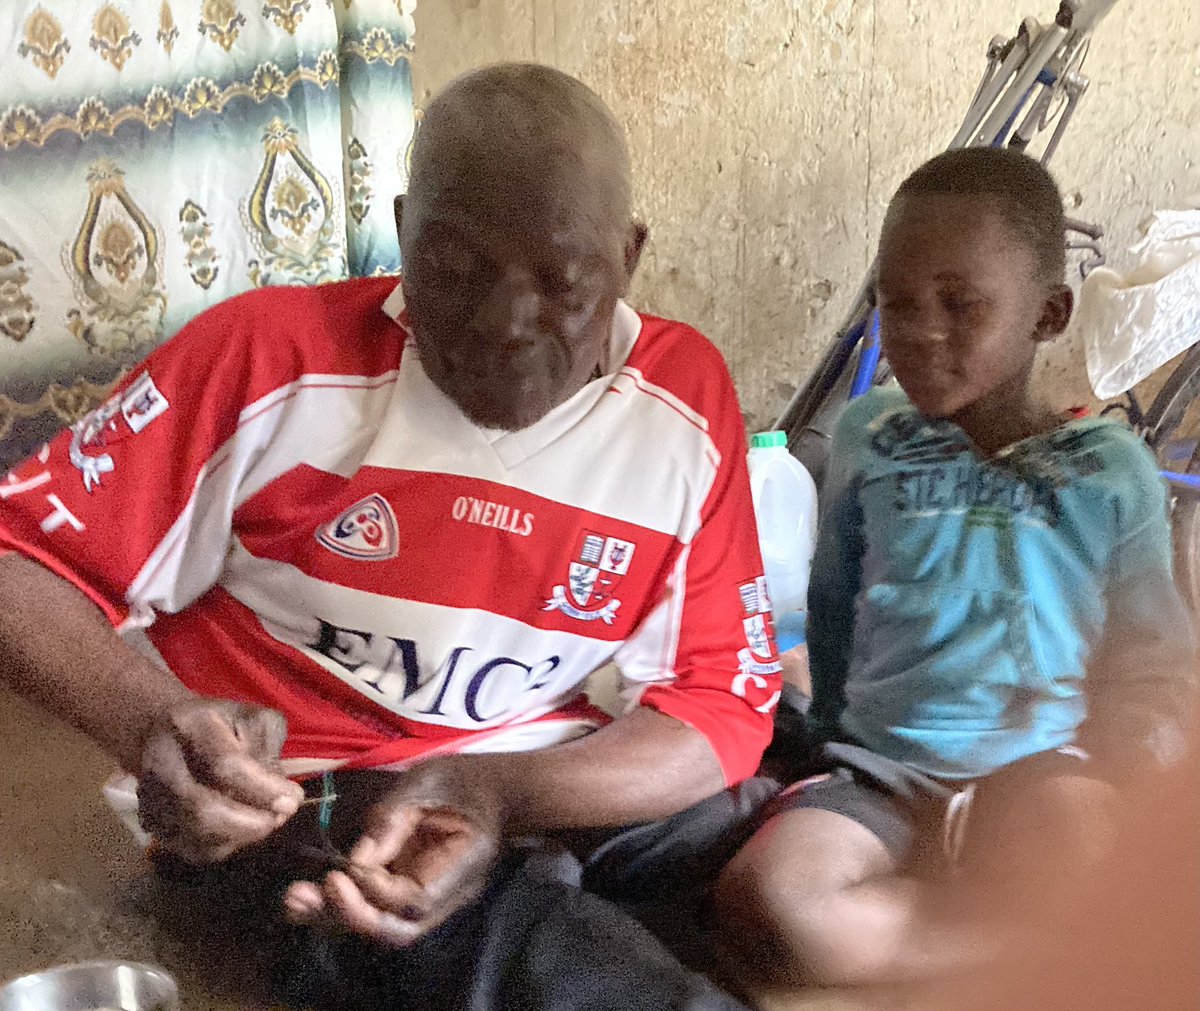 Its hard when you live with a disability esp in Uganda. This man and makes paper beads. They sell for 2000 shillings to provide income. School fees are 200,000 per term. We are grateful to Oscar’s new sponsor, so the family will not have to decide between school fees or food.